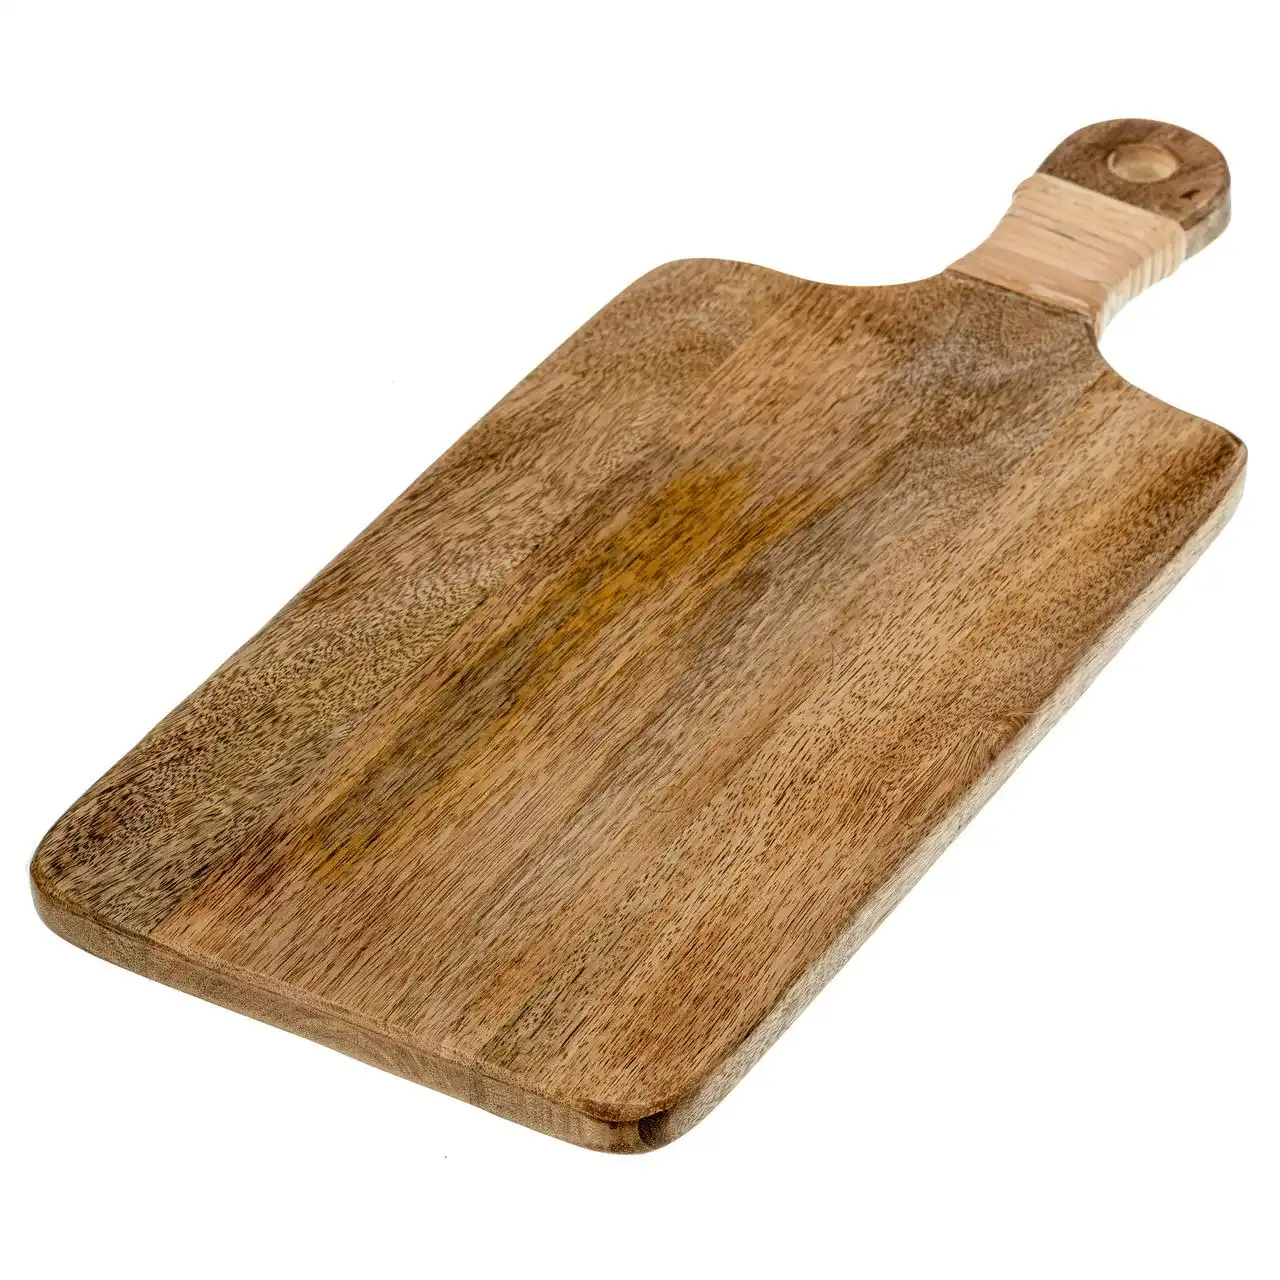 Casa Wood Board with Rattan Wrap Handle in Natural